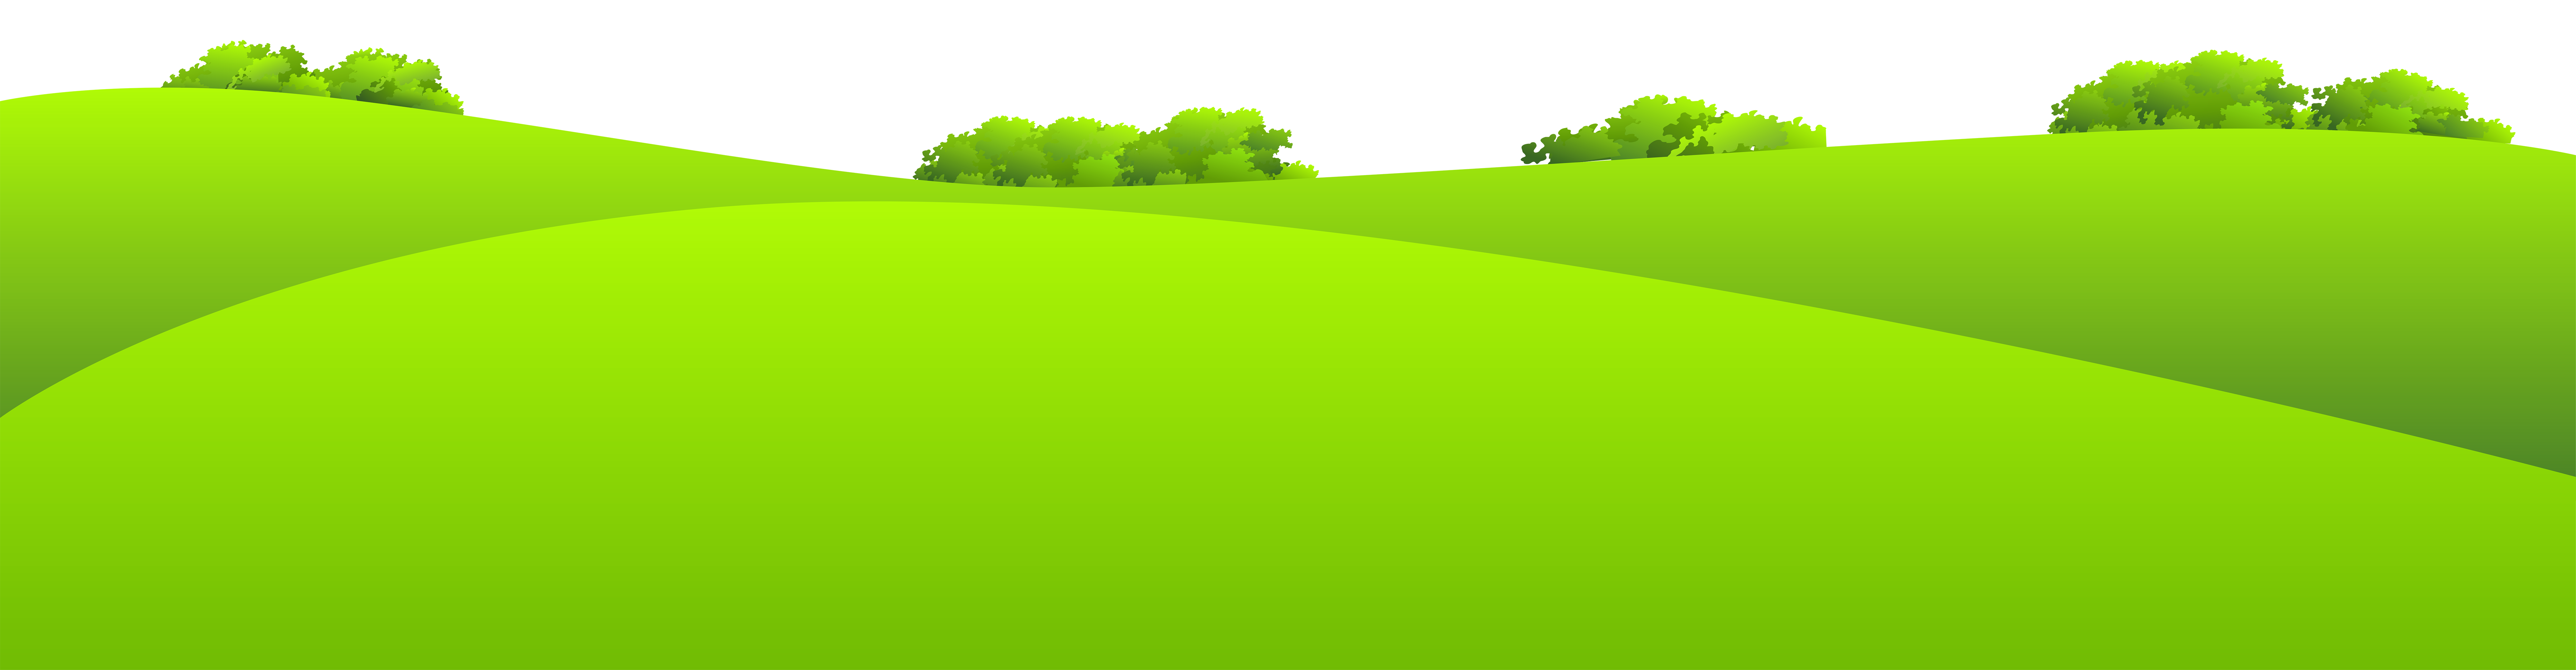 Green meadow with shrubs. Lake clipart lanscape